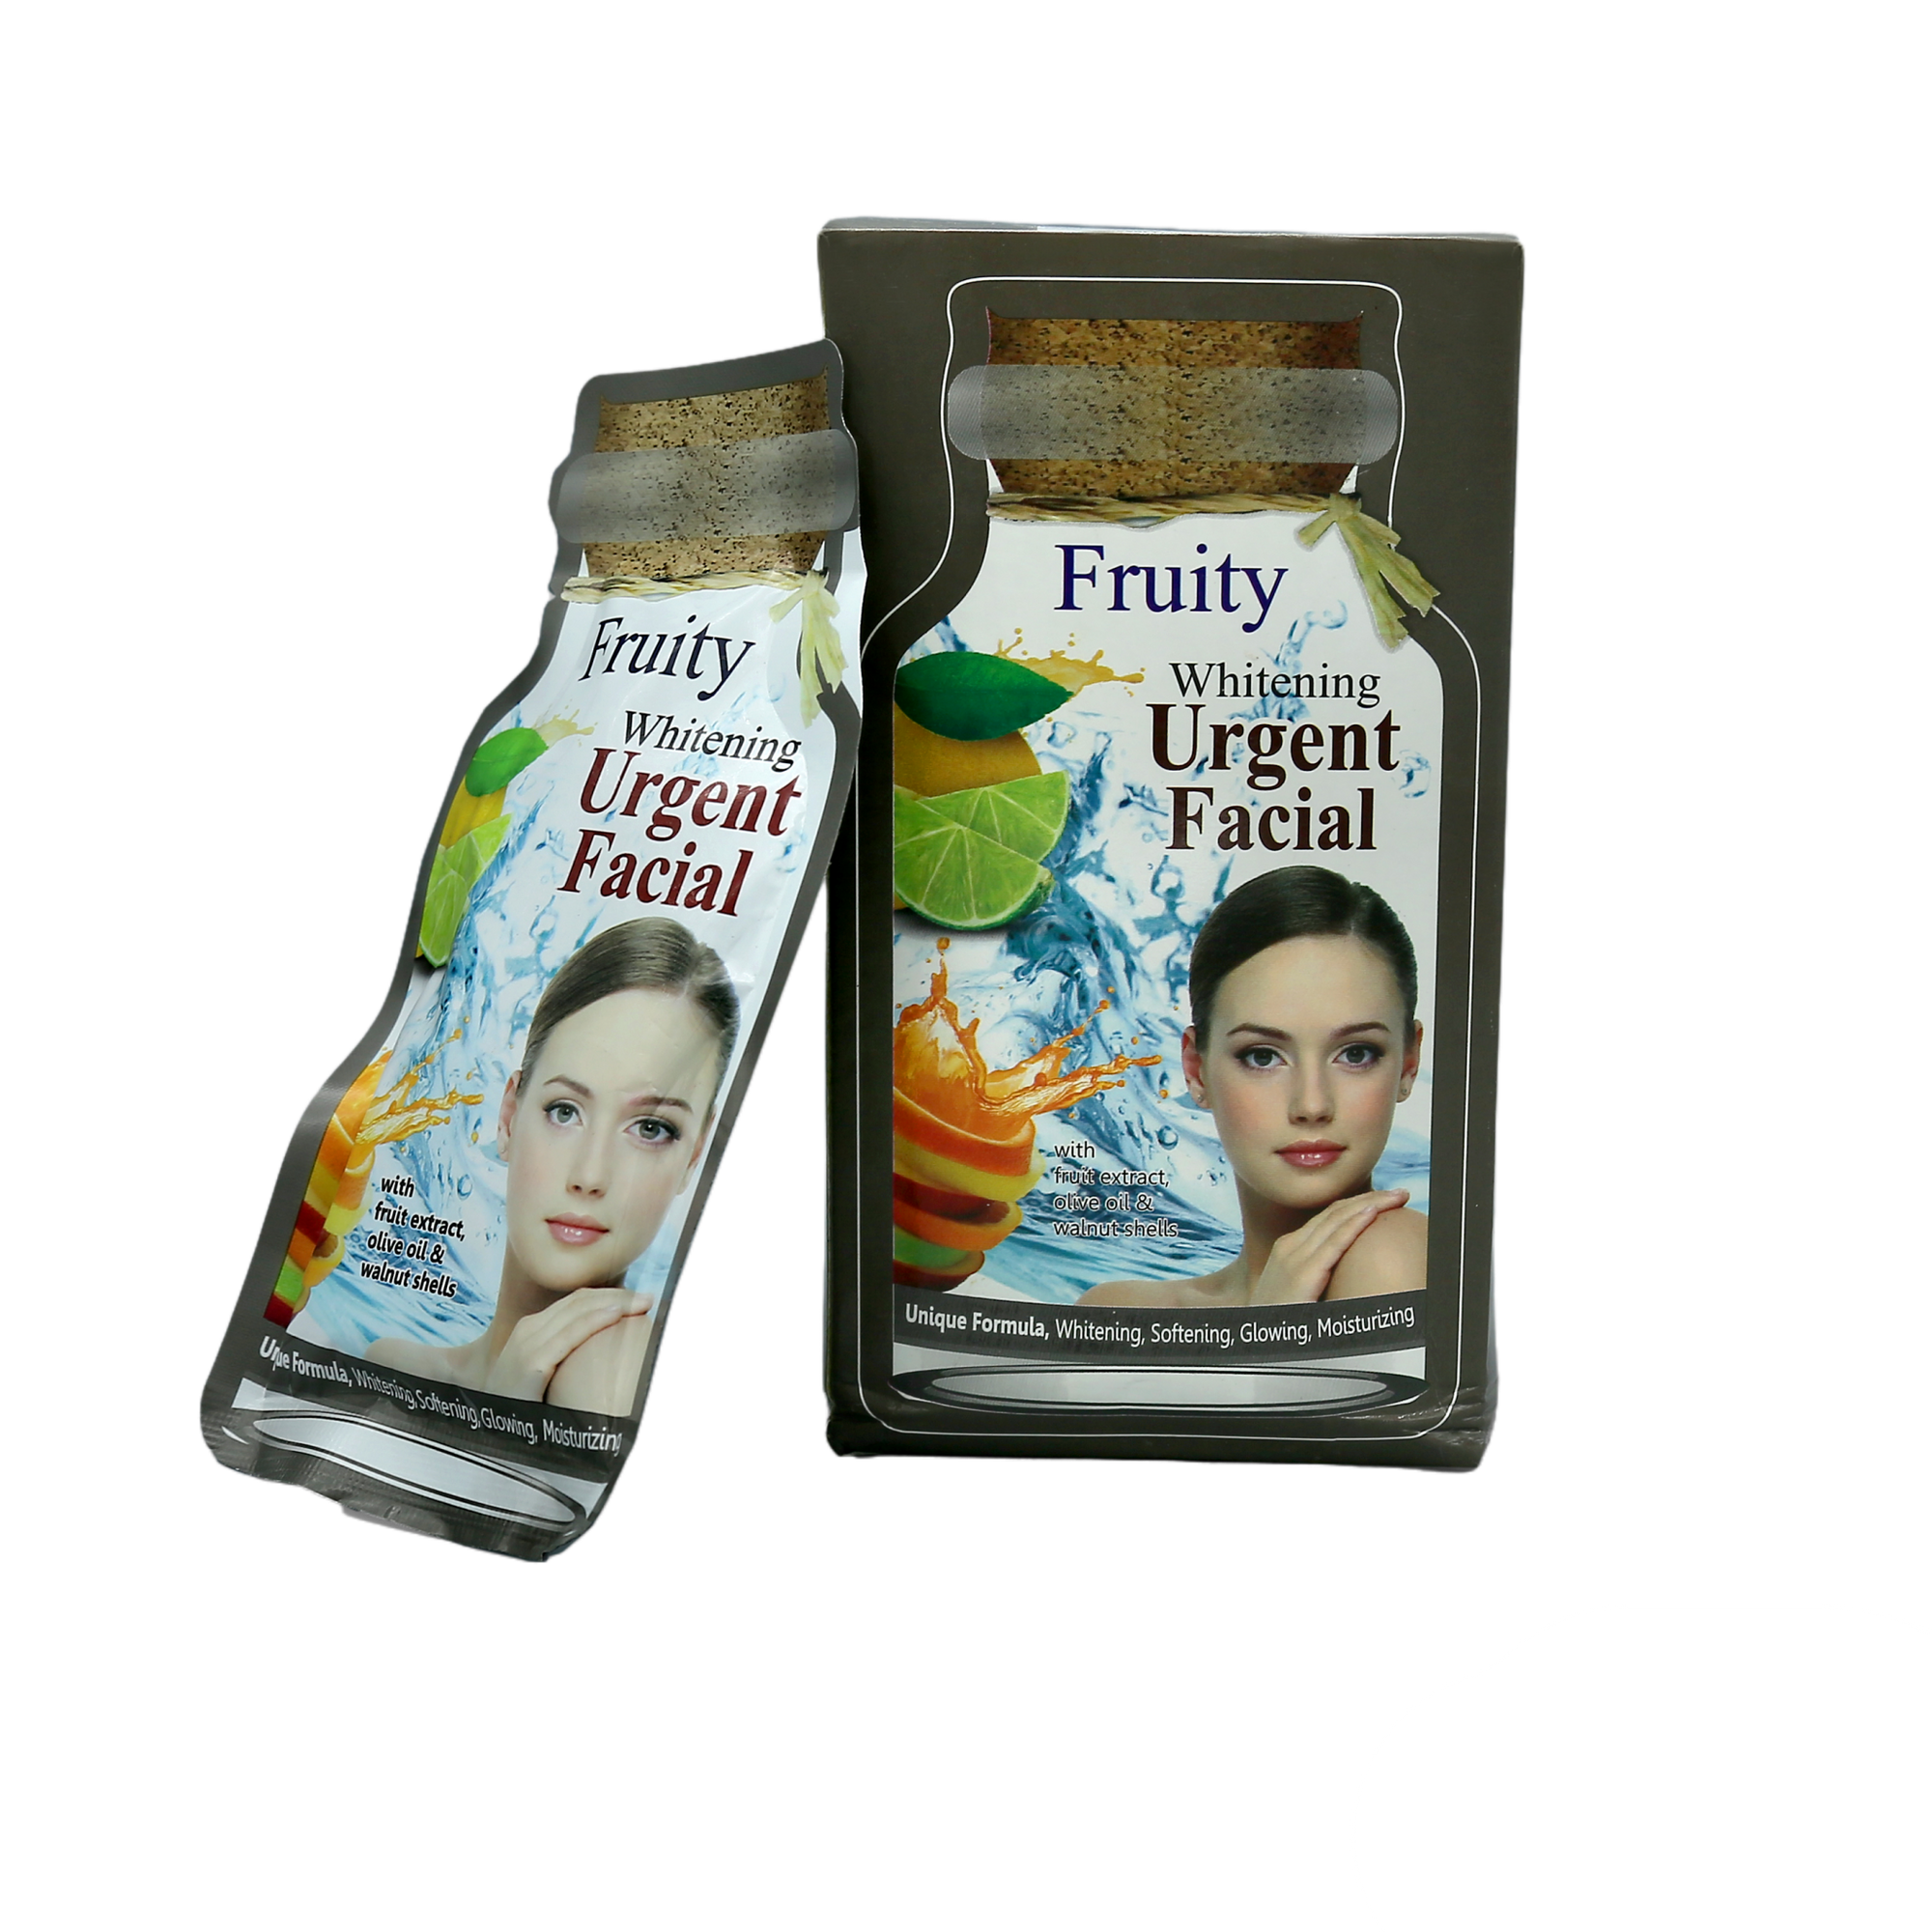 Fruity Whitening Urgent Facial With Fruit Extract Olive Oil & Walnut Shells 25g freeshipping - lasertag.pk